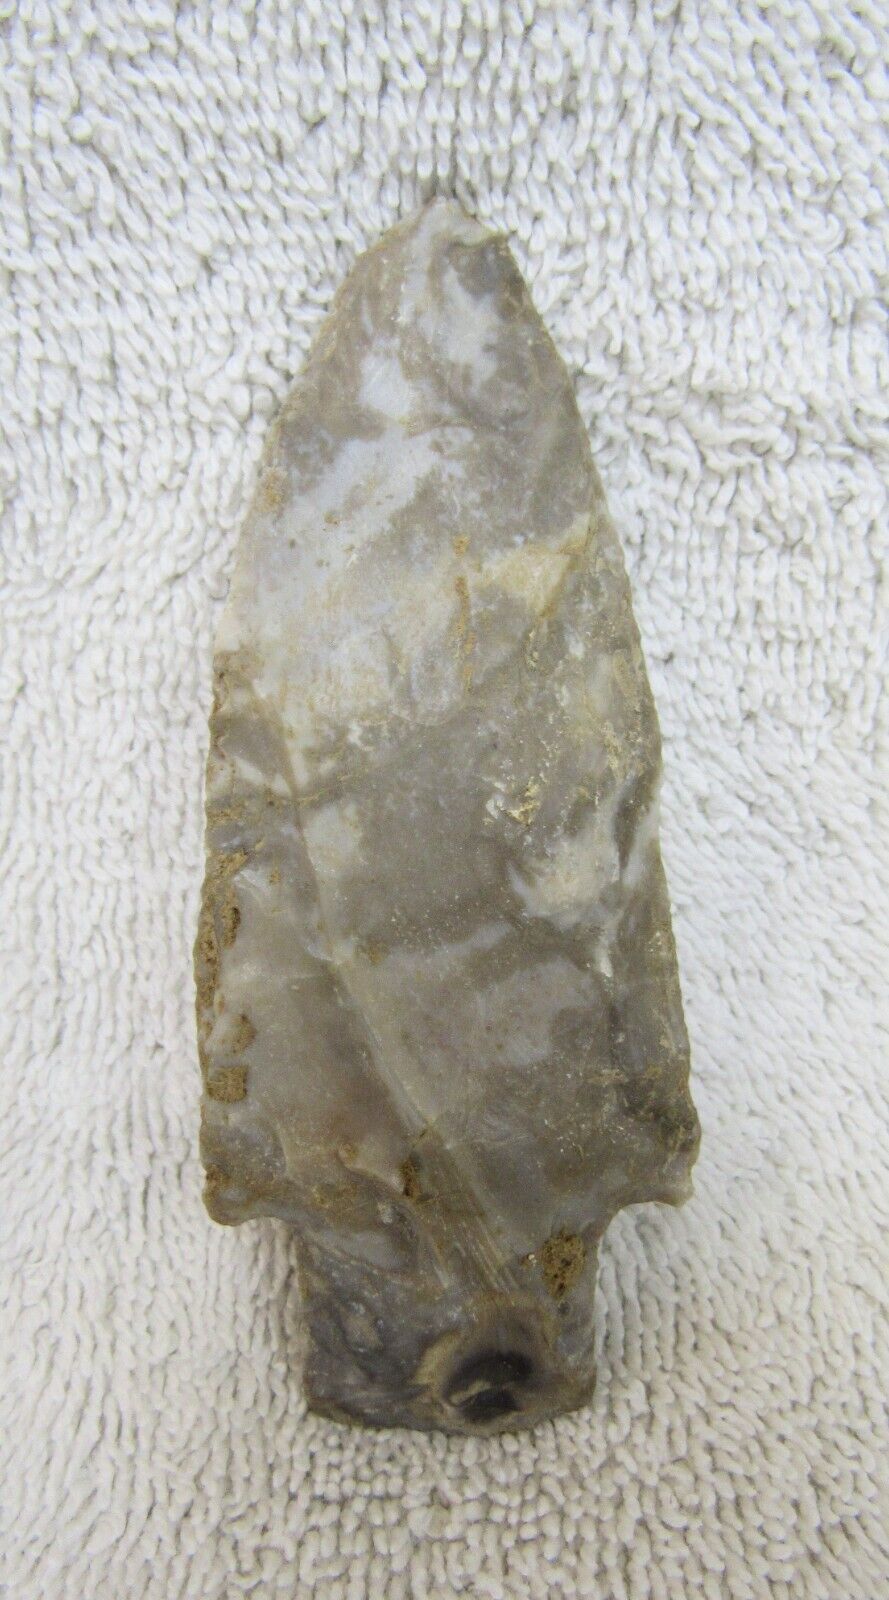 Ancient Texas New Mexico Lanceolate Arrowhead Knife Projectile Point Artifact 6